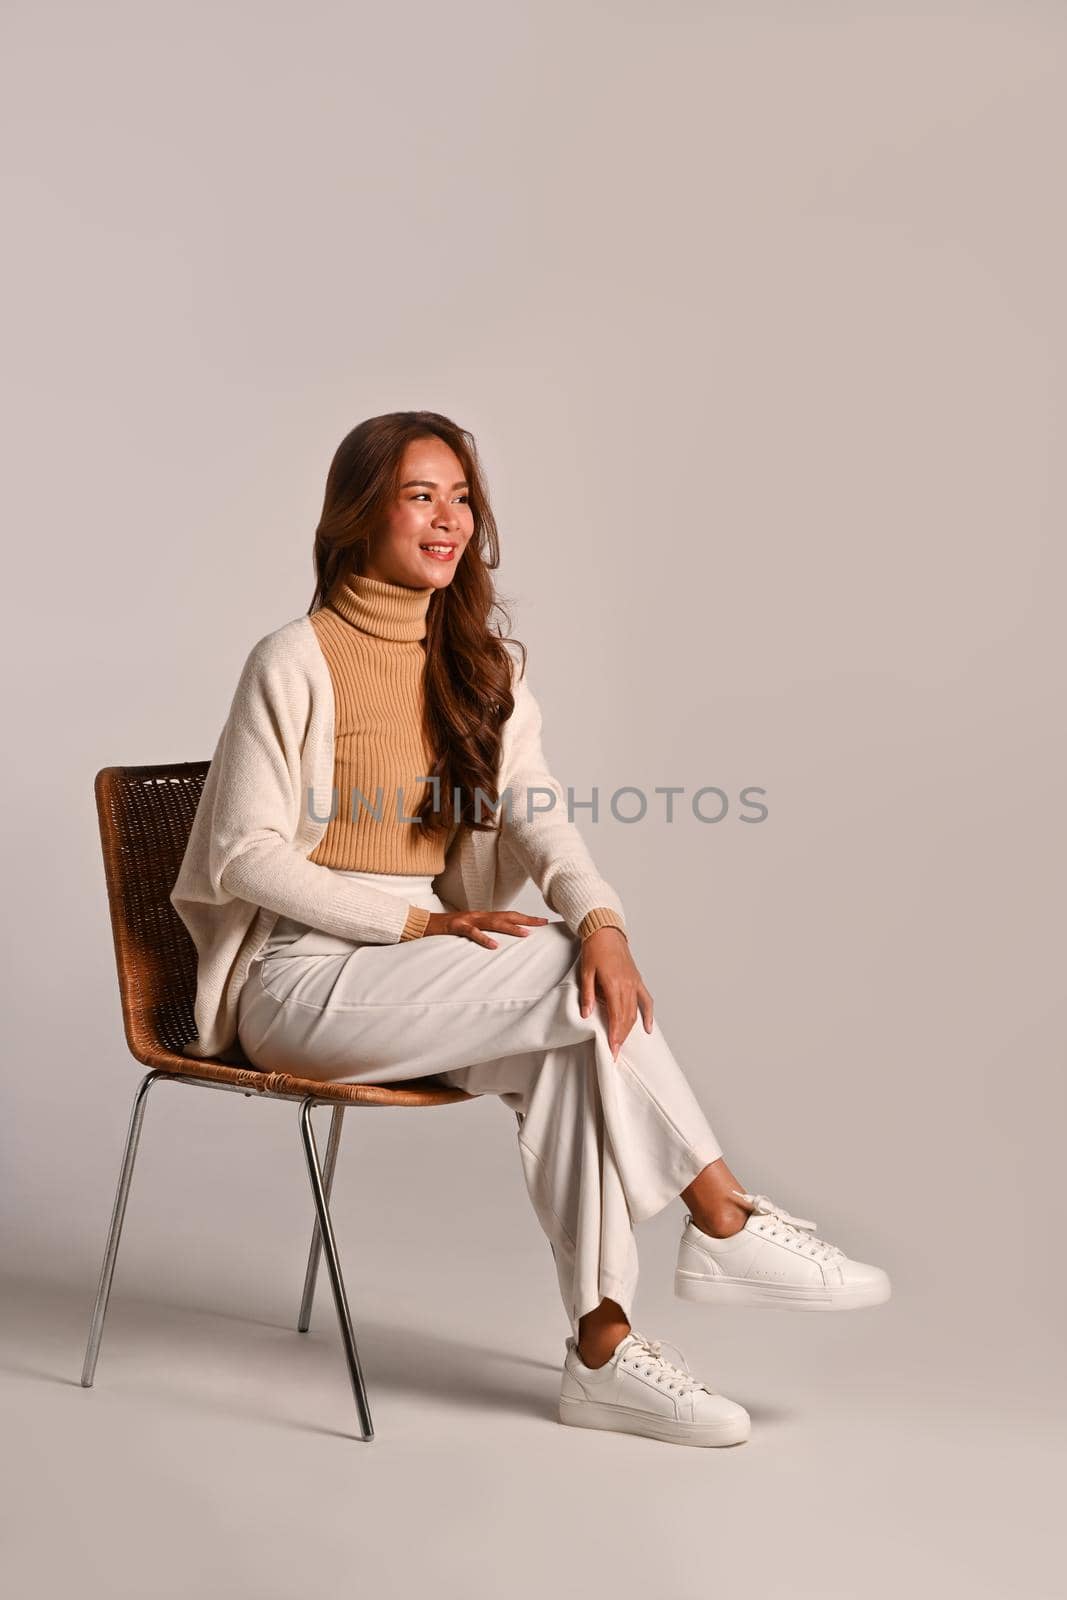 Full length portrait of beautiful woman wearing warm sweater sitting on a chair over white background. Studio shot.